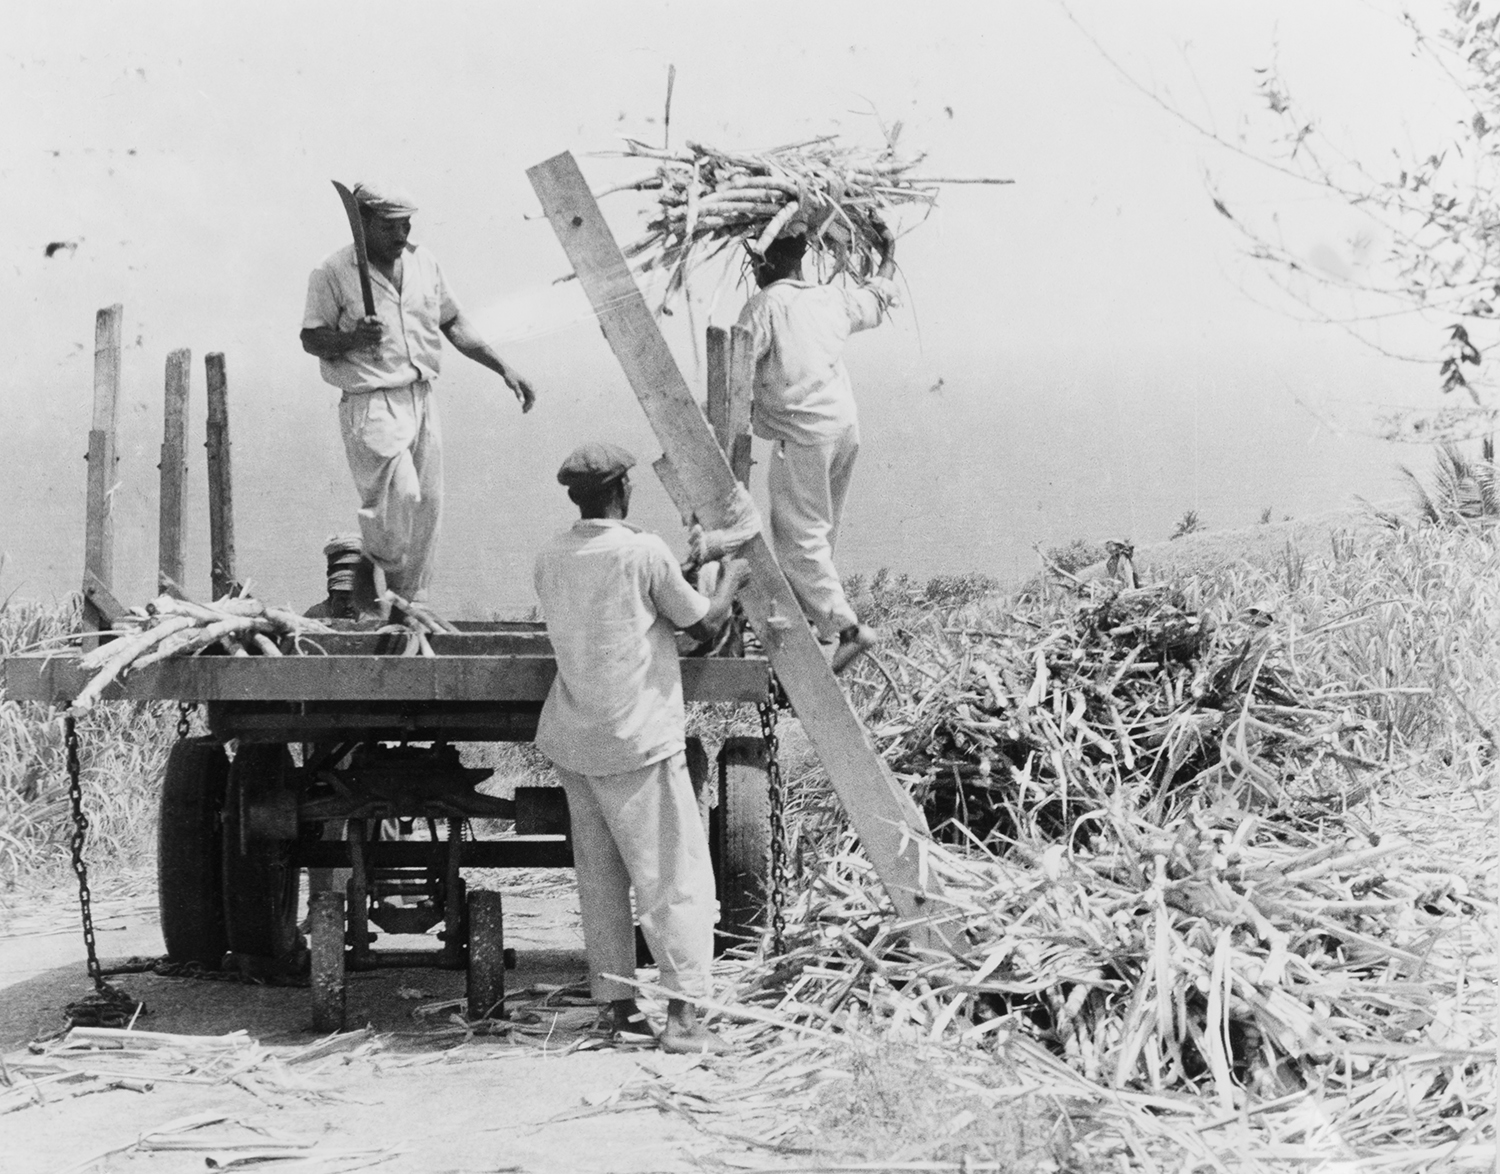 Three men standing atop equipment and in a field use machetes to harvest sugar cane at a plantation in Barbados in 1965.